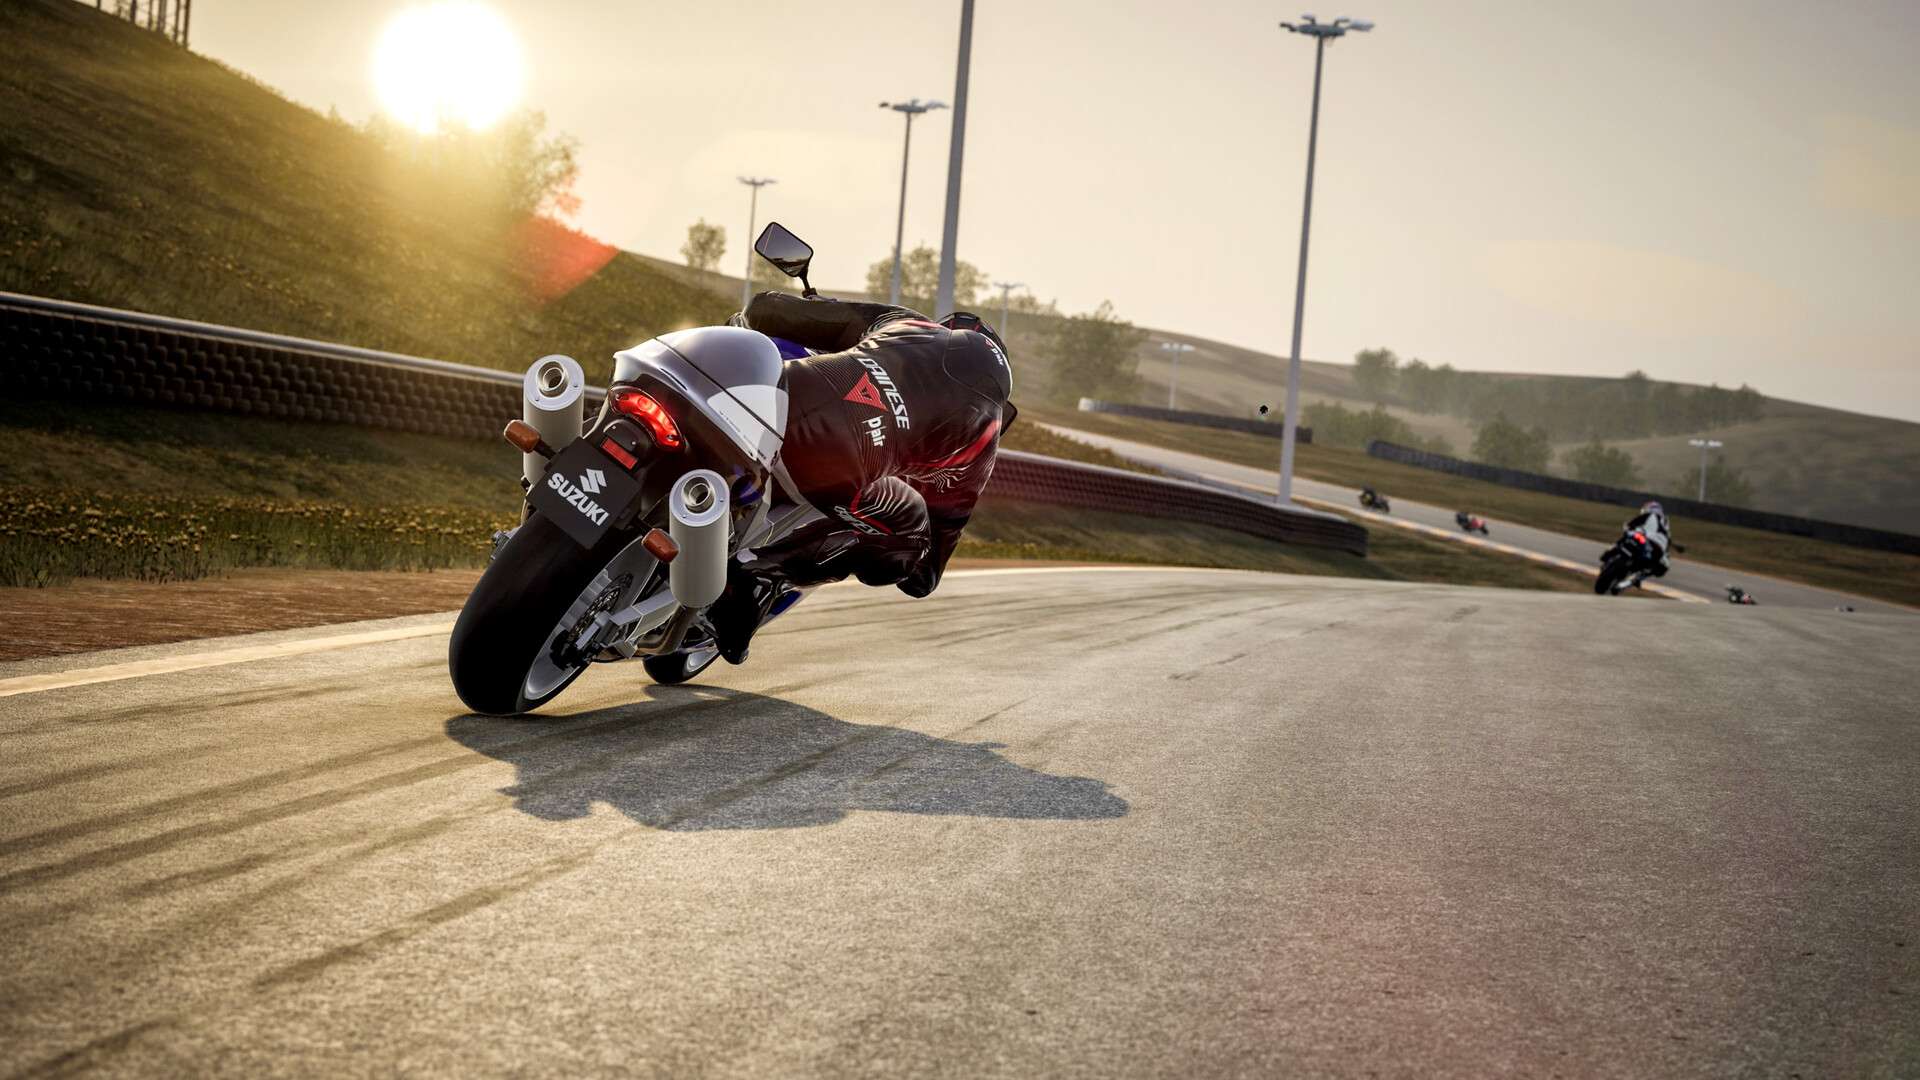 RIDE 5 Walkthrough Trailer Details Weather, AI Improvements, Career Mode, and More